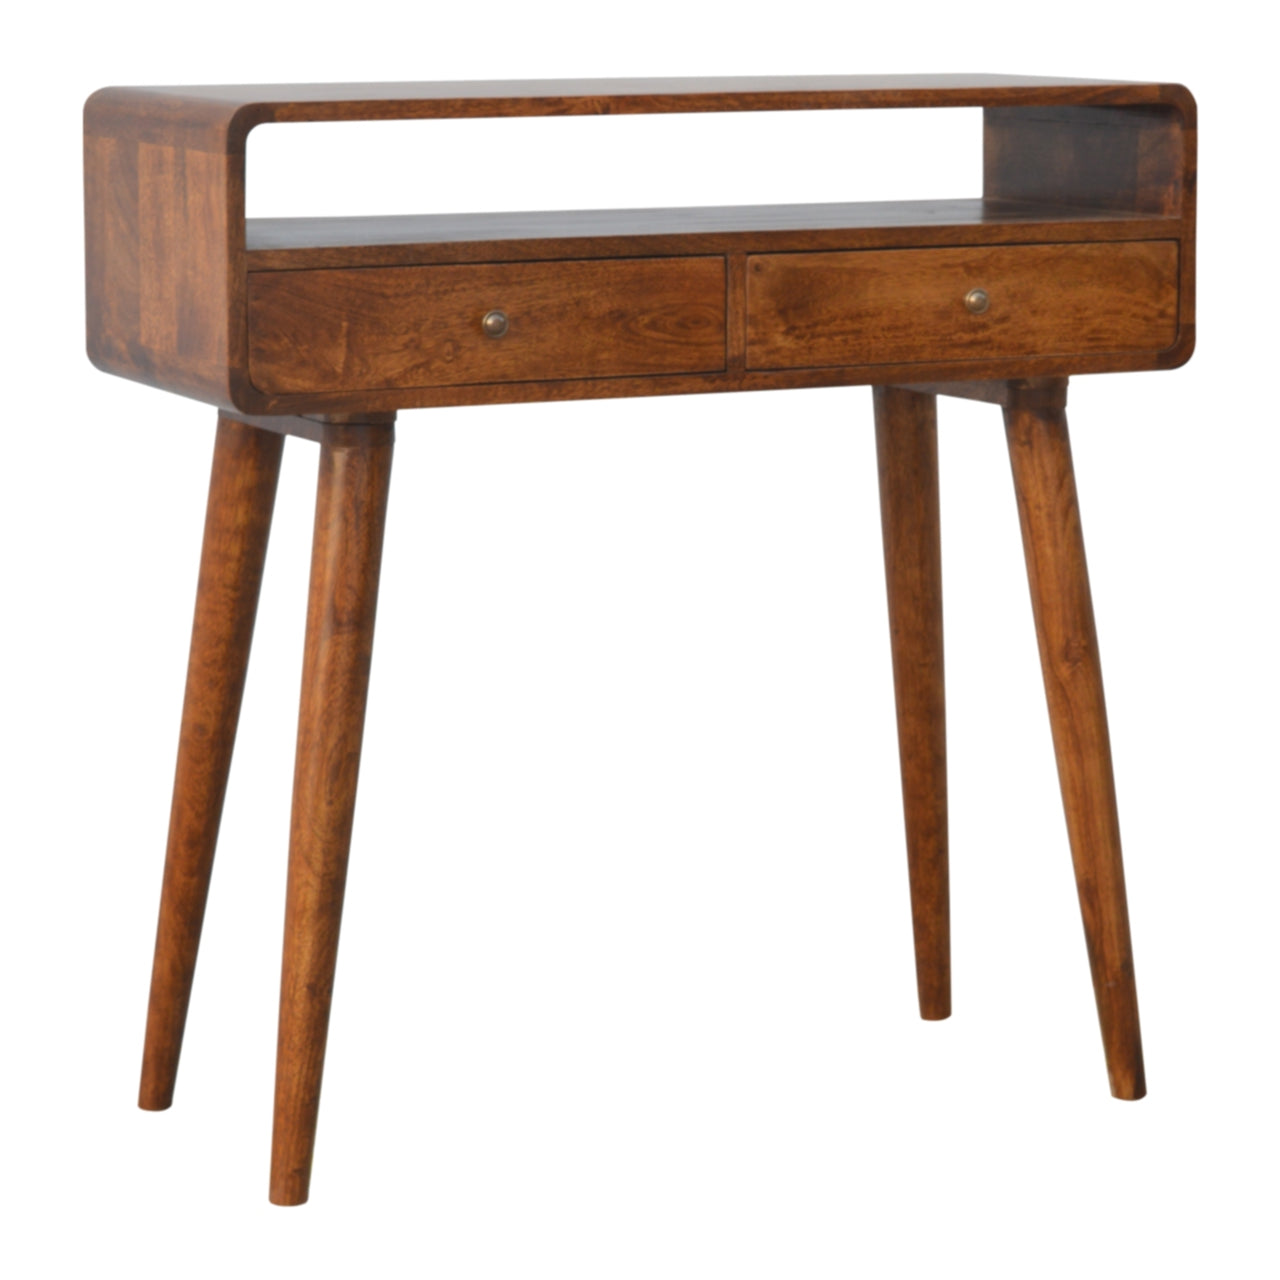 Apsel Console Table, Wooden Curved Chestnut - Broxle